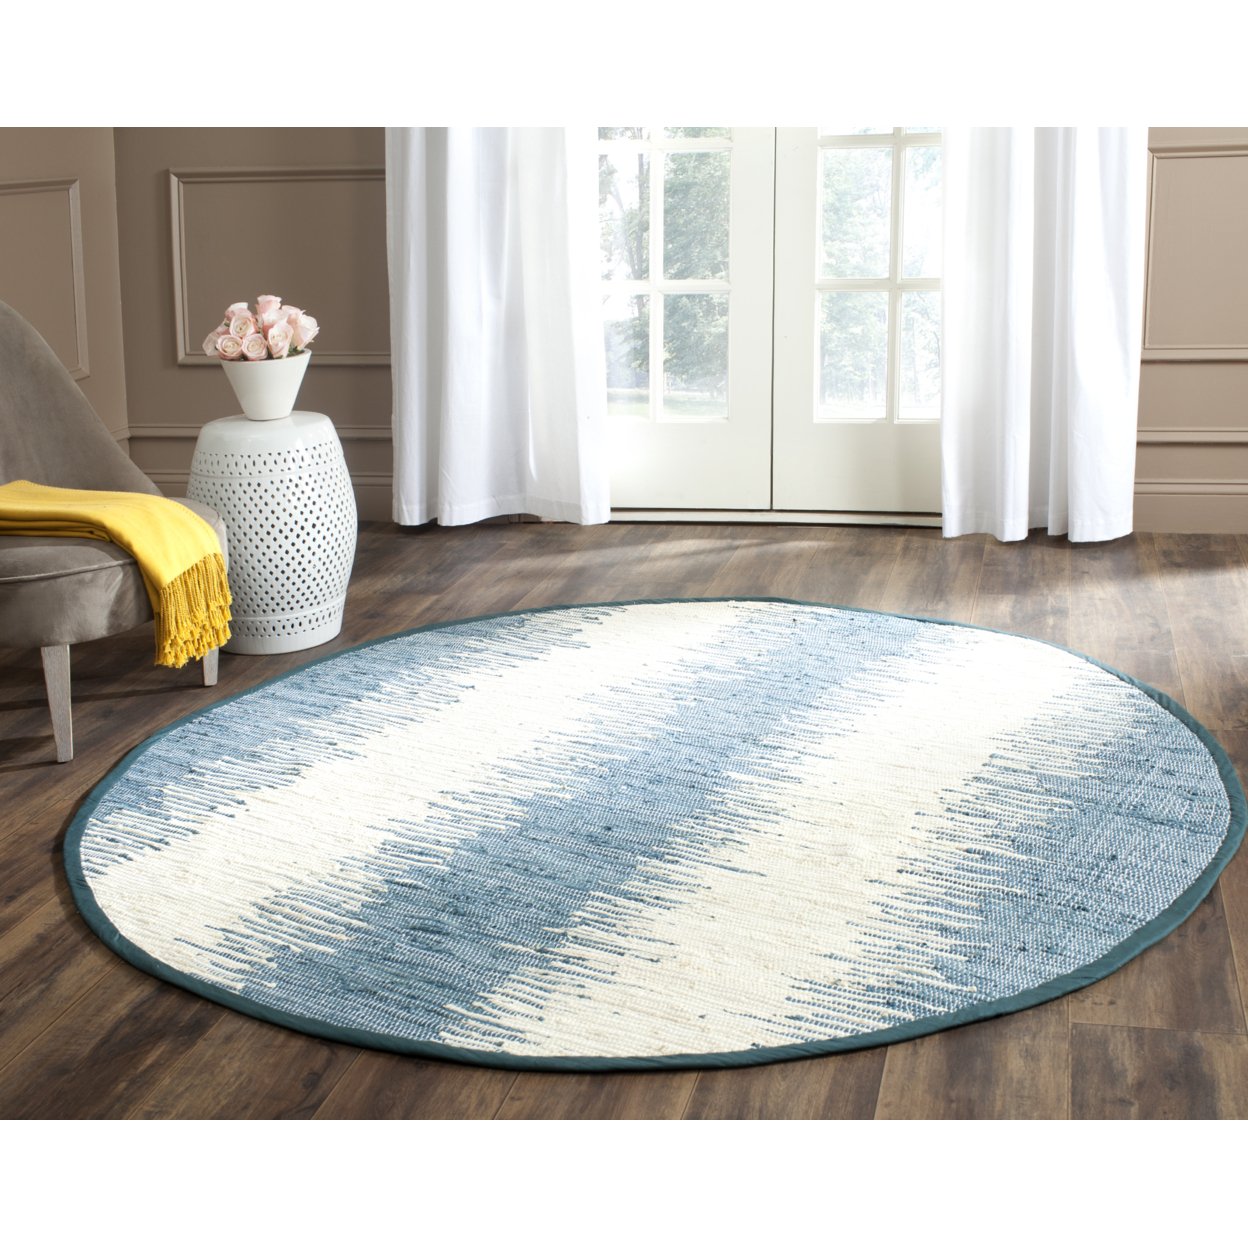 SAFAVIEH Montauk Collection MTK751A Handwoven Blue Rug - 4' Square